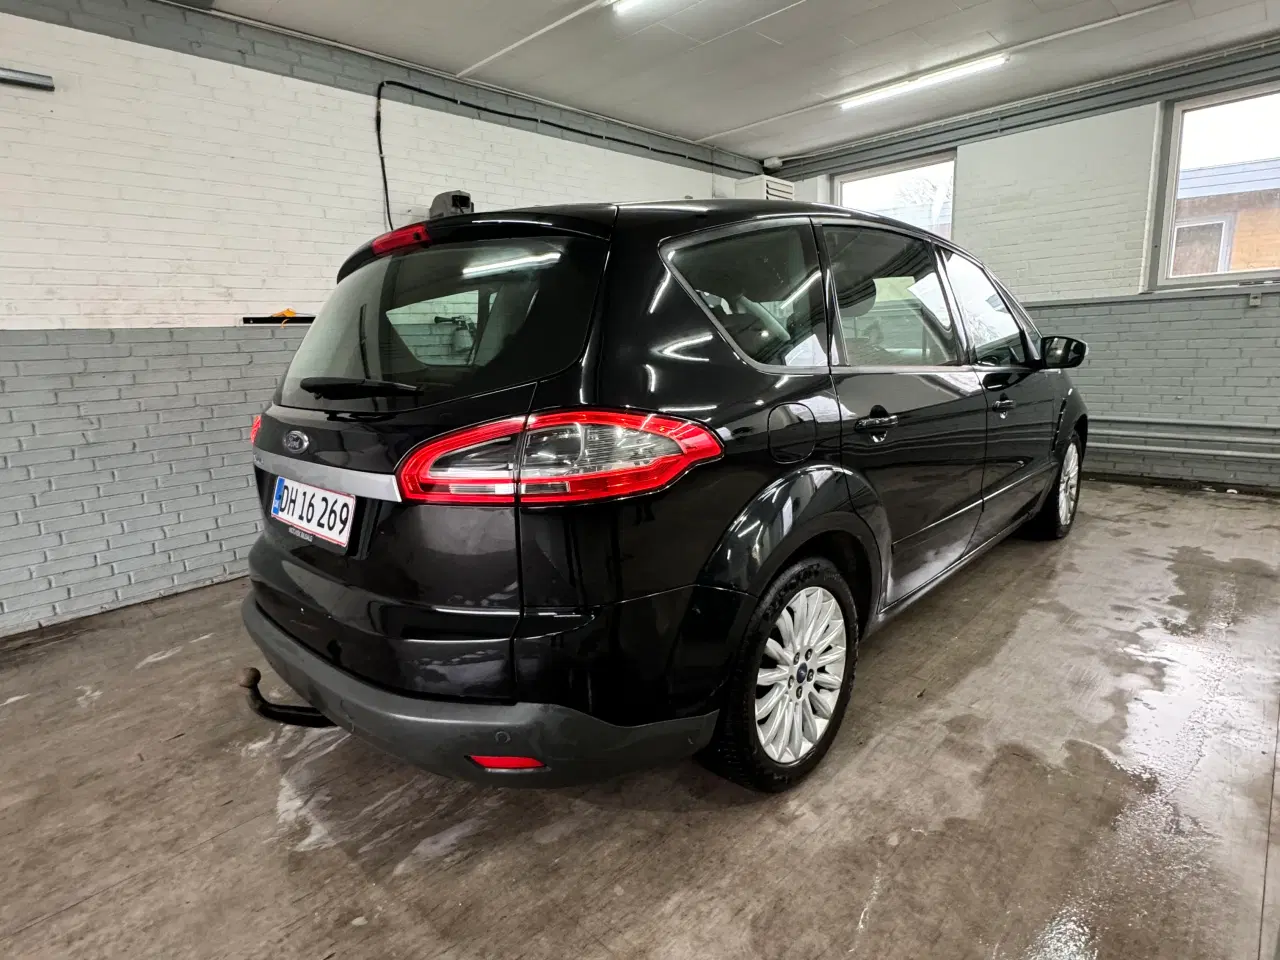 Billede 2 - Ford S-Max - 7 personers 